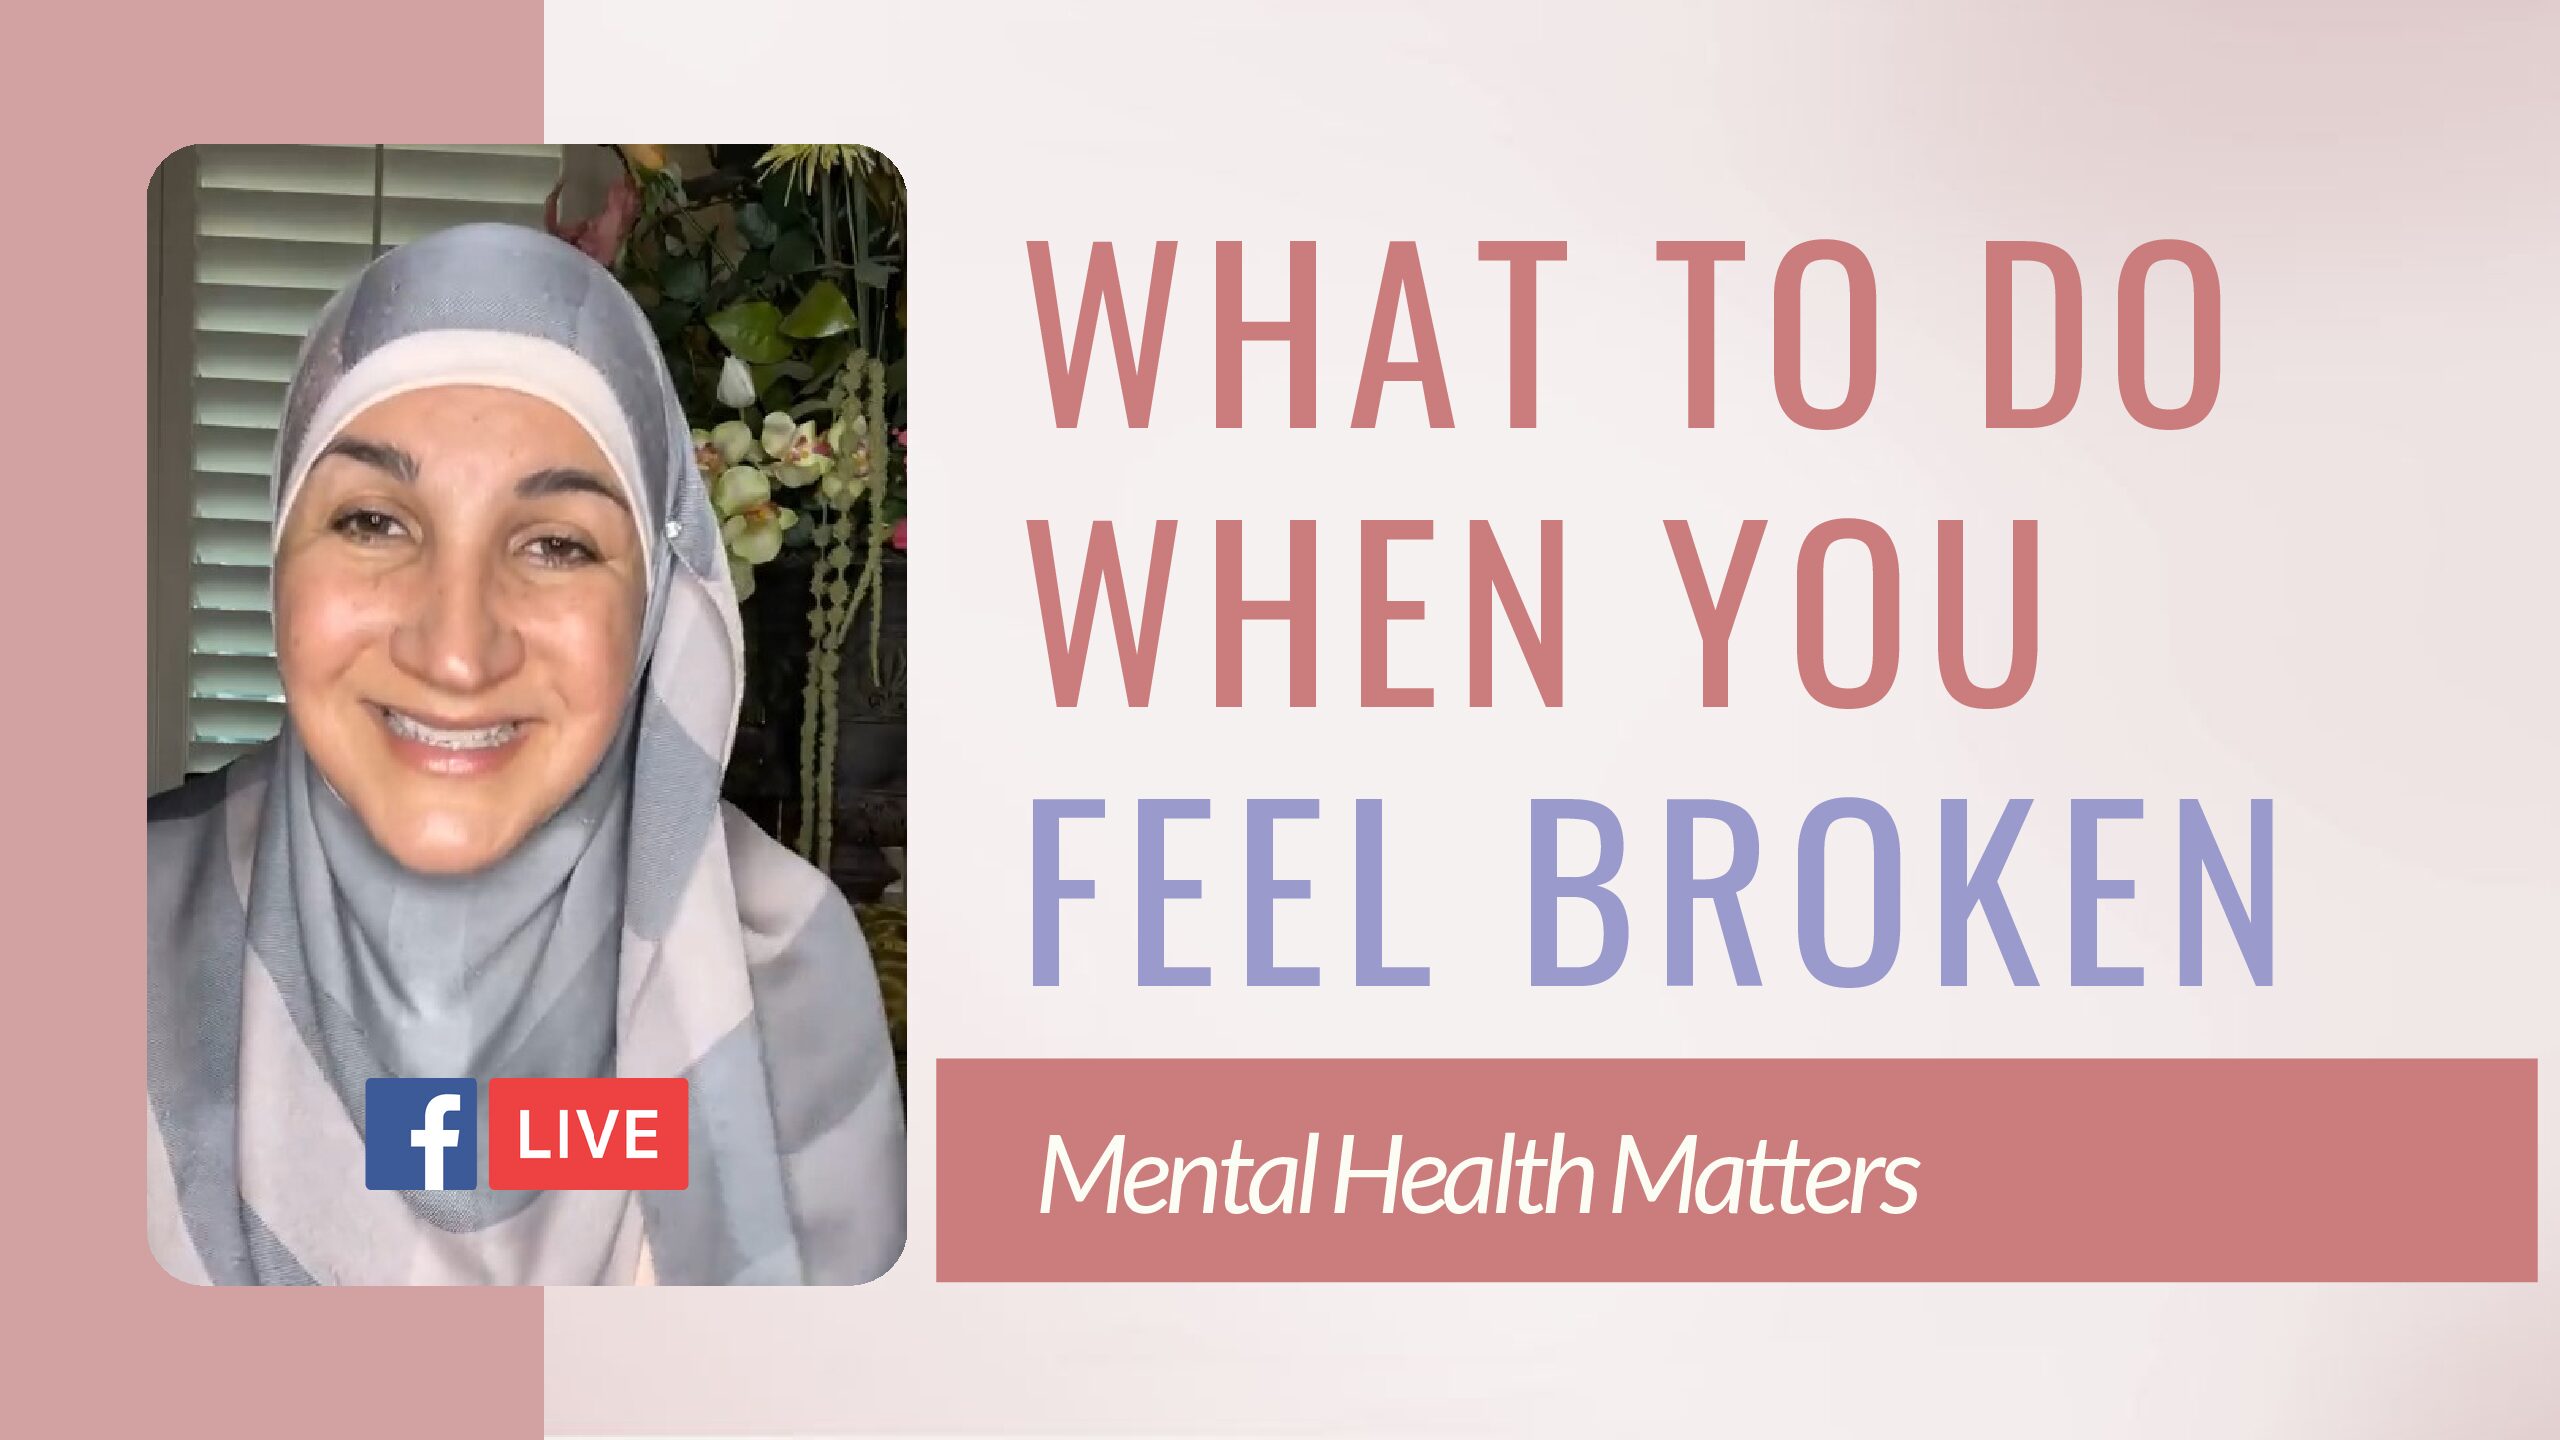 What to do when you feel broken